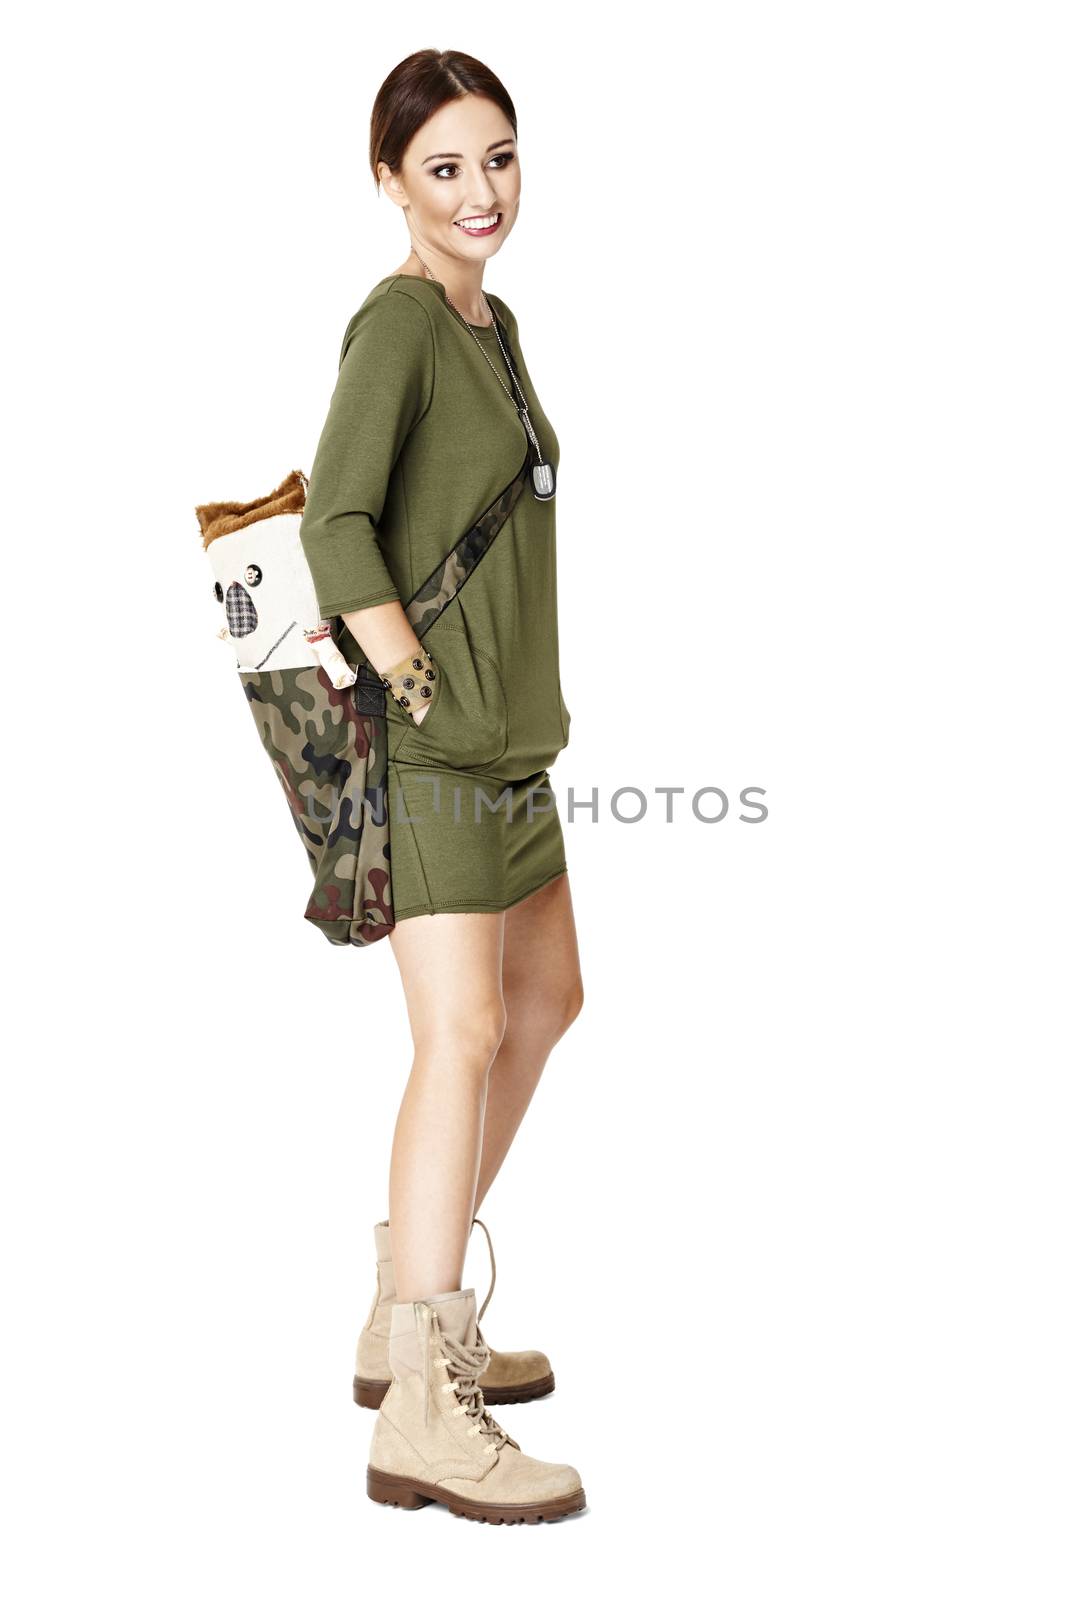 Woman With Bag by filipw